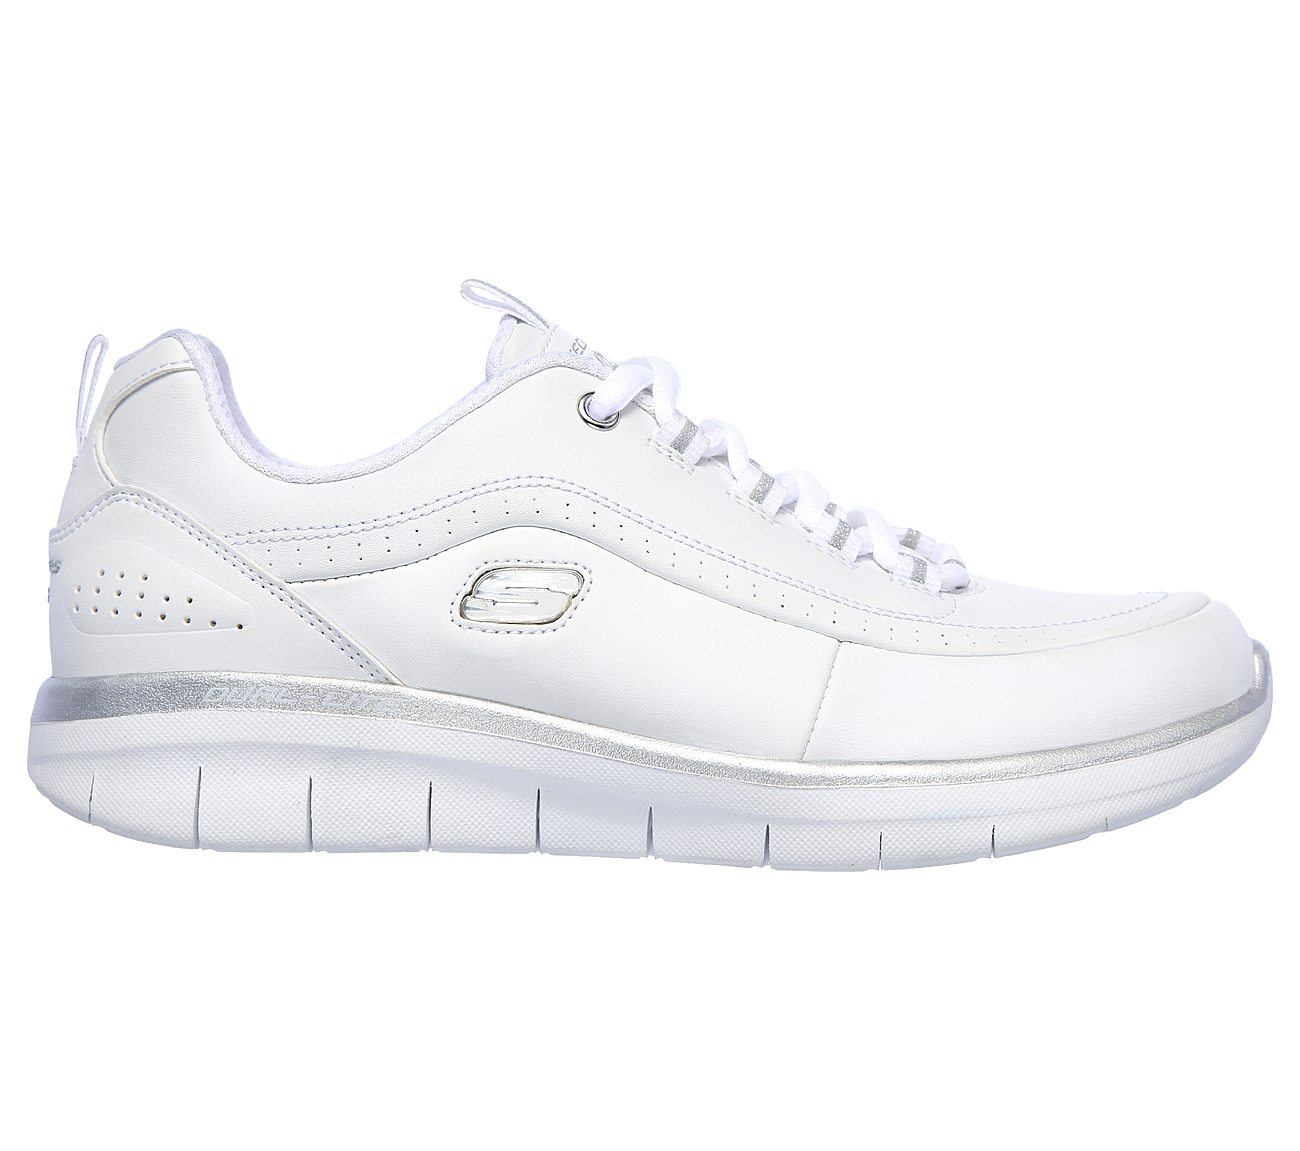 skechers synergy 2.0 womens walking shoes